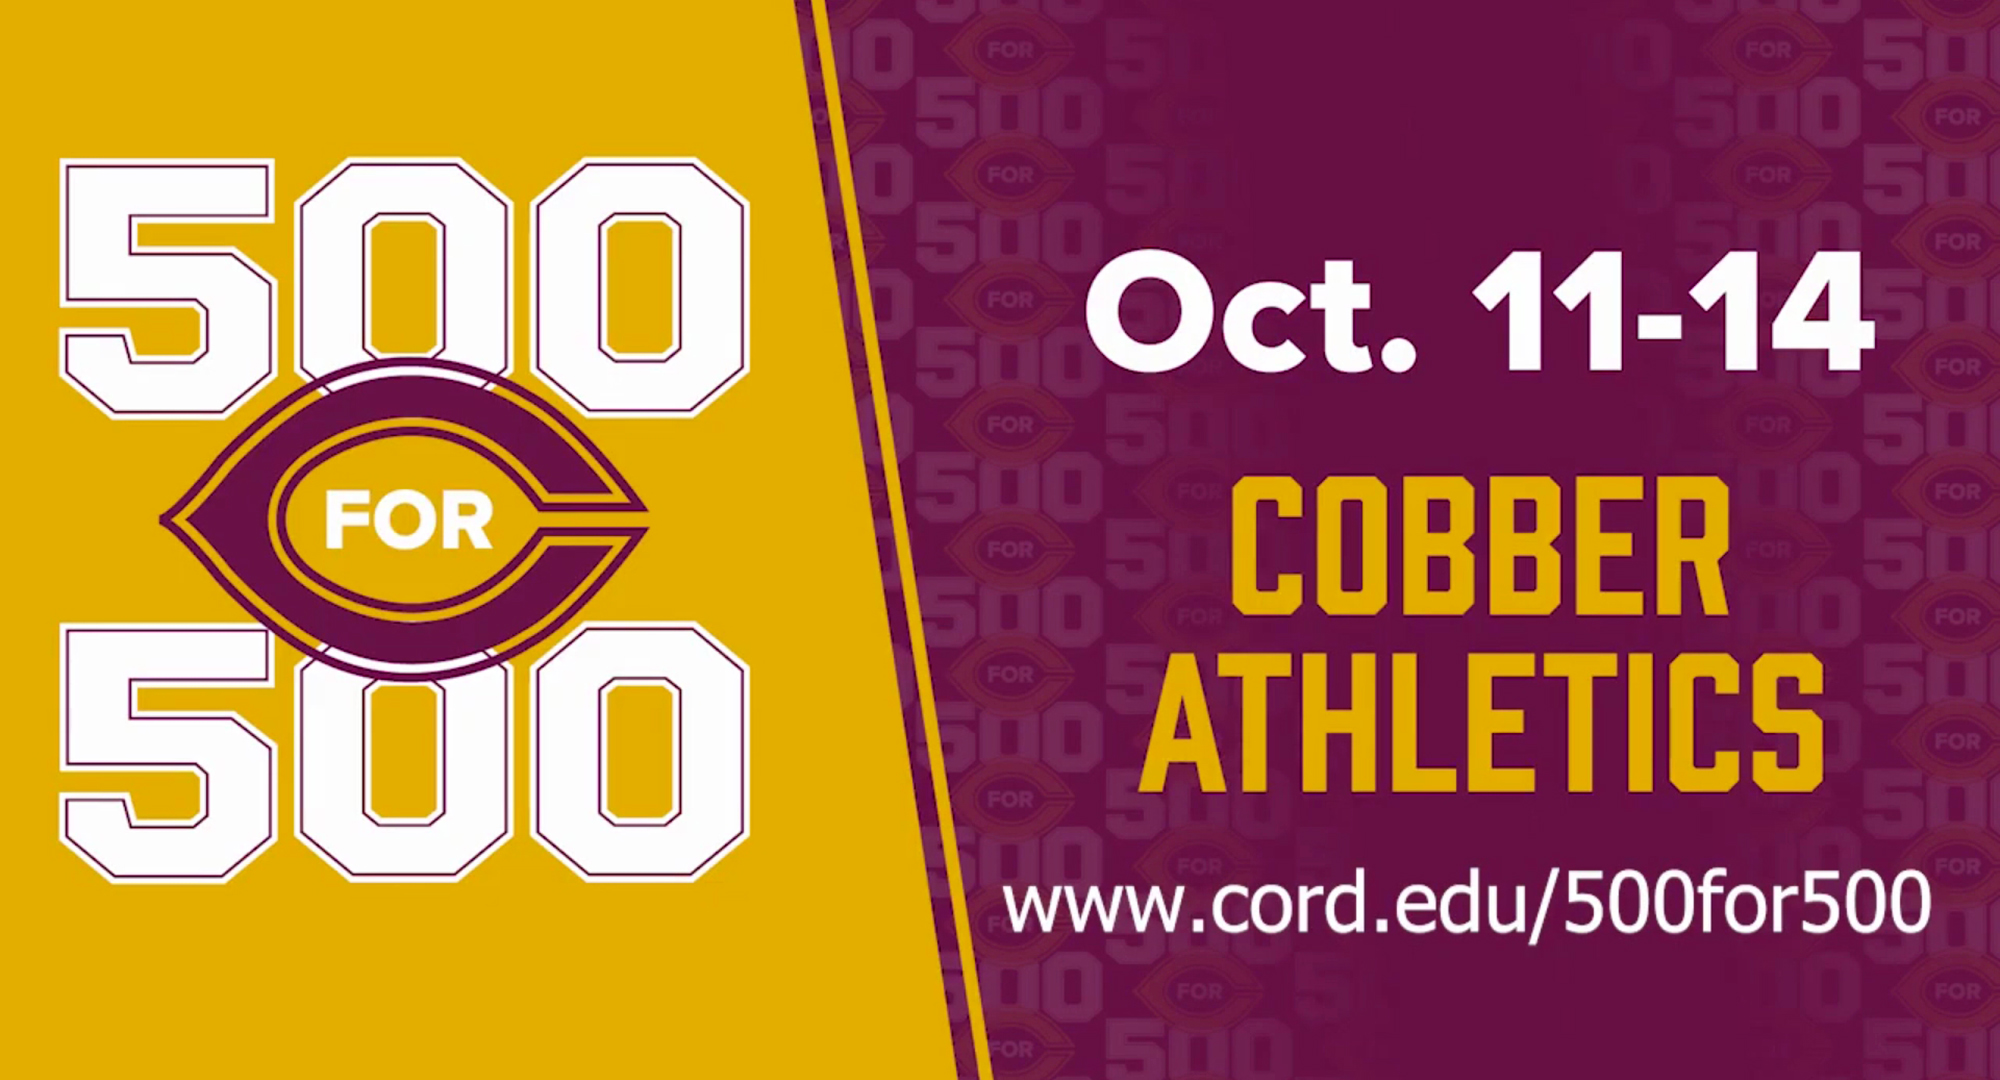 Homecoming week means it's time for the annual Cobber athletics 500 for 500 giving challenge!